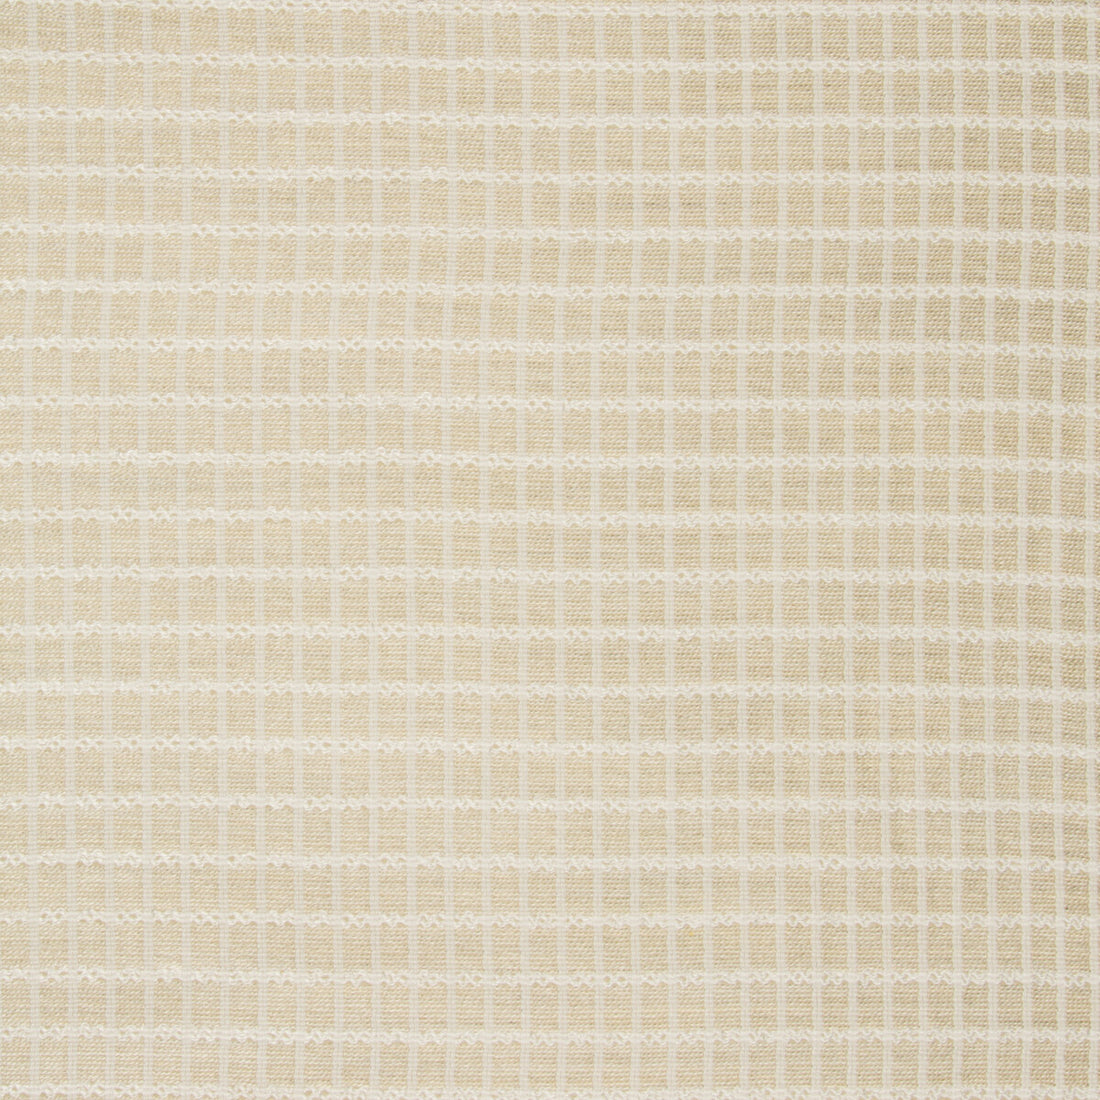 Sheer Latitude fabric in creme color - pattern 90042.116.0 - by Kravet Couture in the Thom Filicia Altitude collection